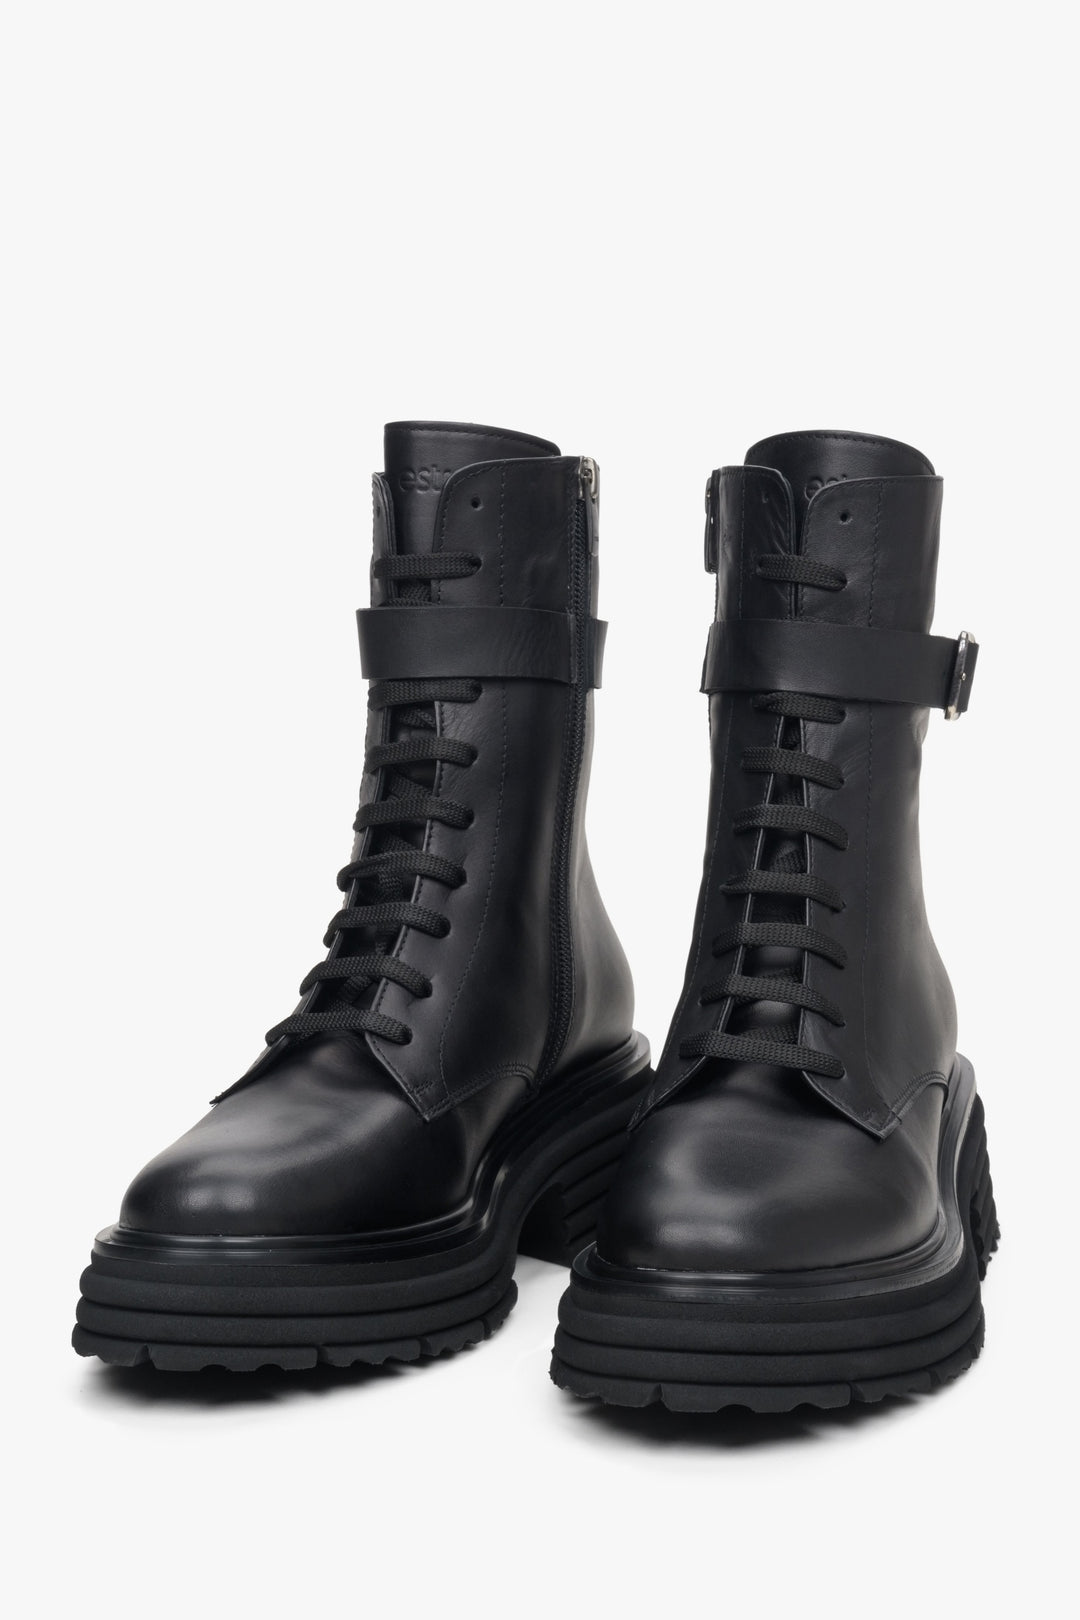 Women's black boots by Estro with a decorative strap - front view of the model.